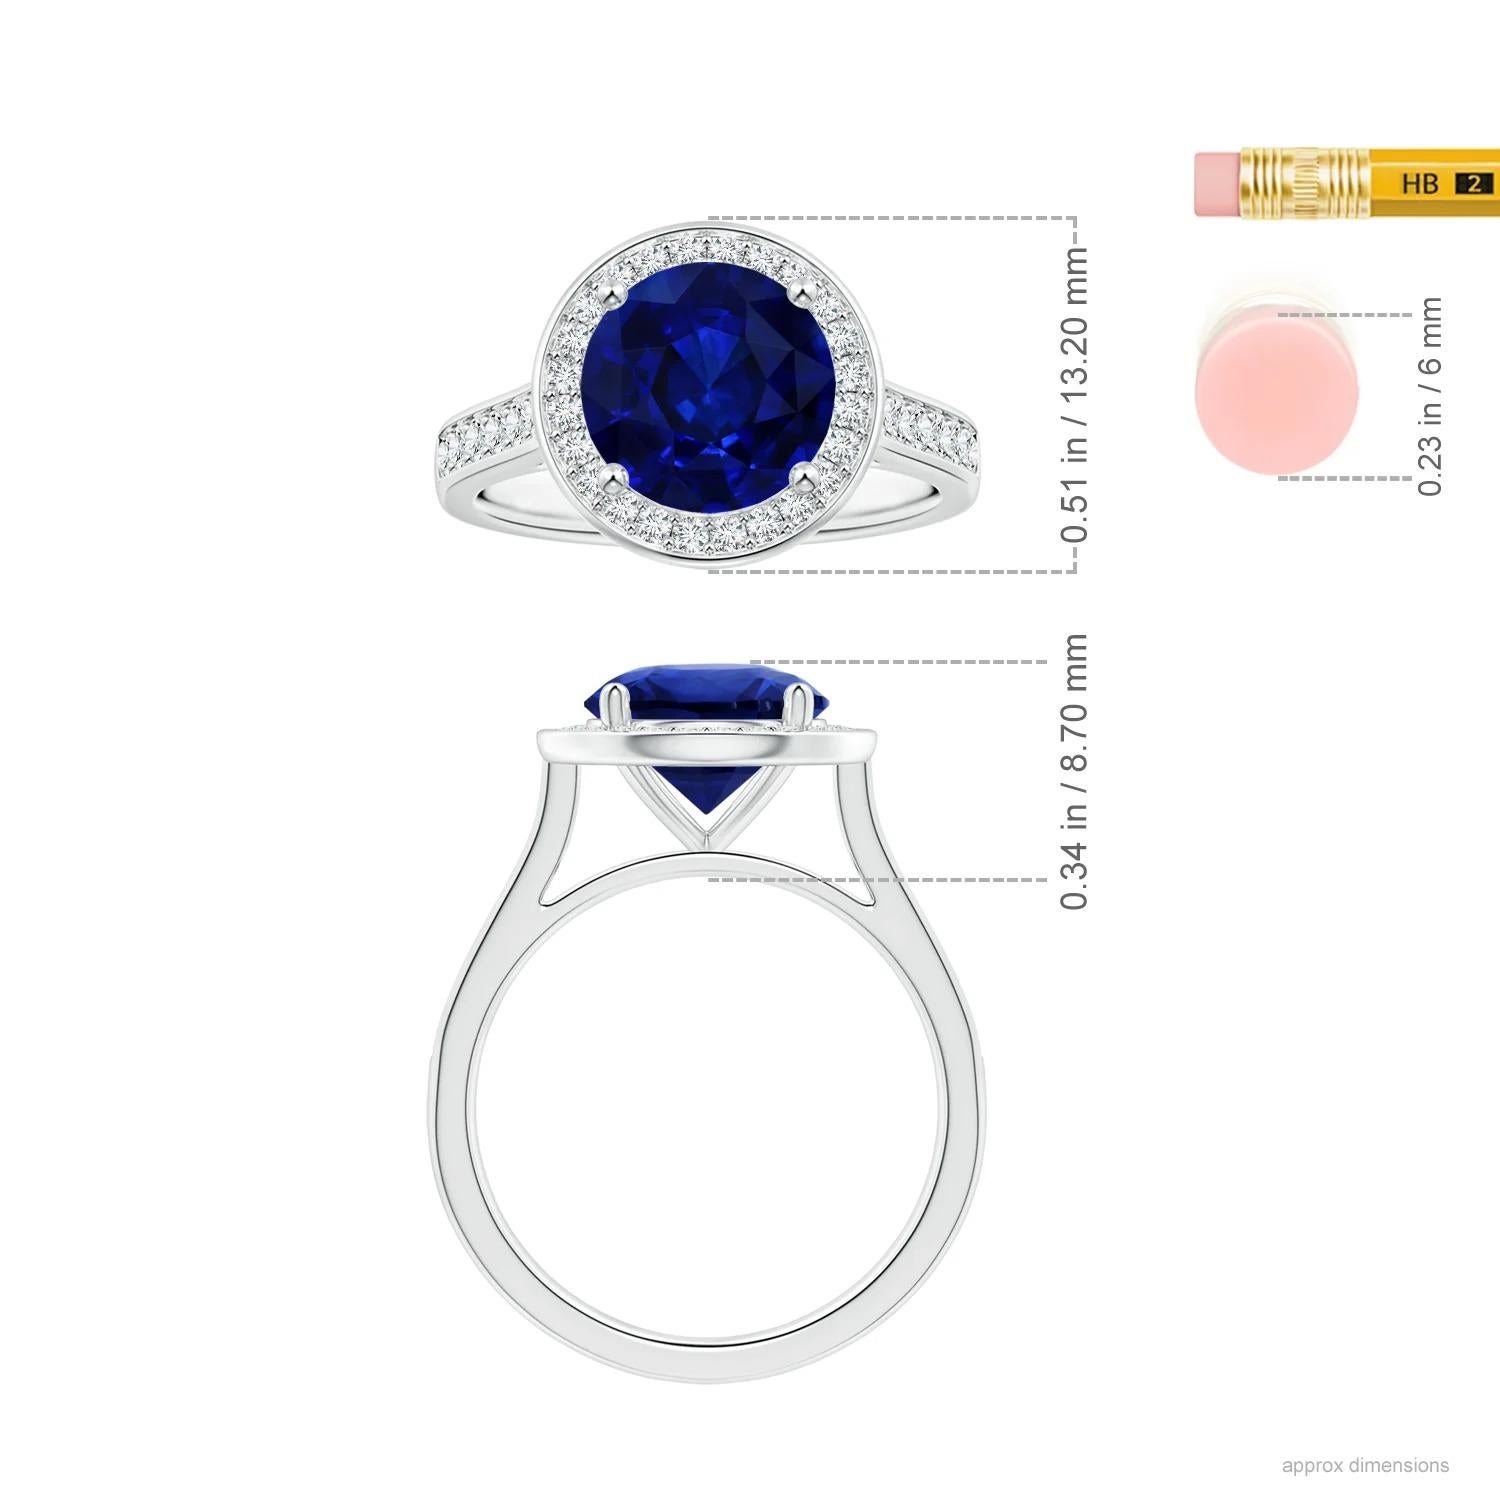 For Sale:  Angara Gia Certified Blue Sapphire Halo Ring in Platinum with Diamonds 5